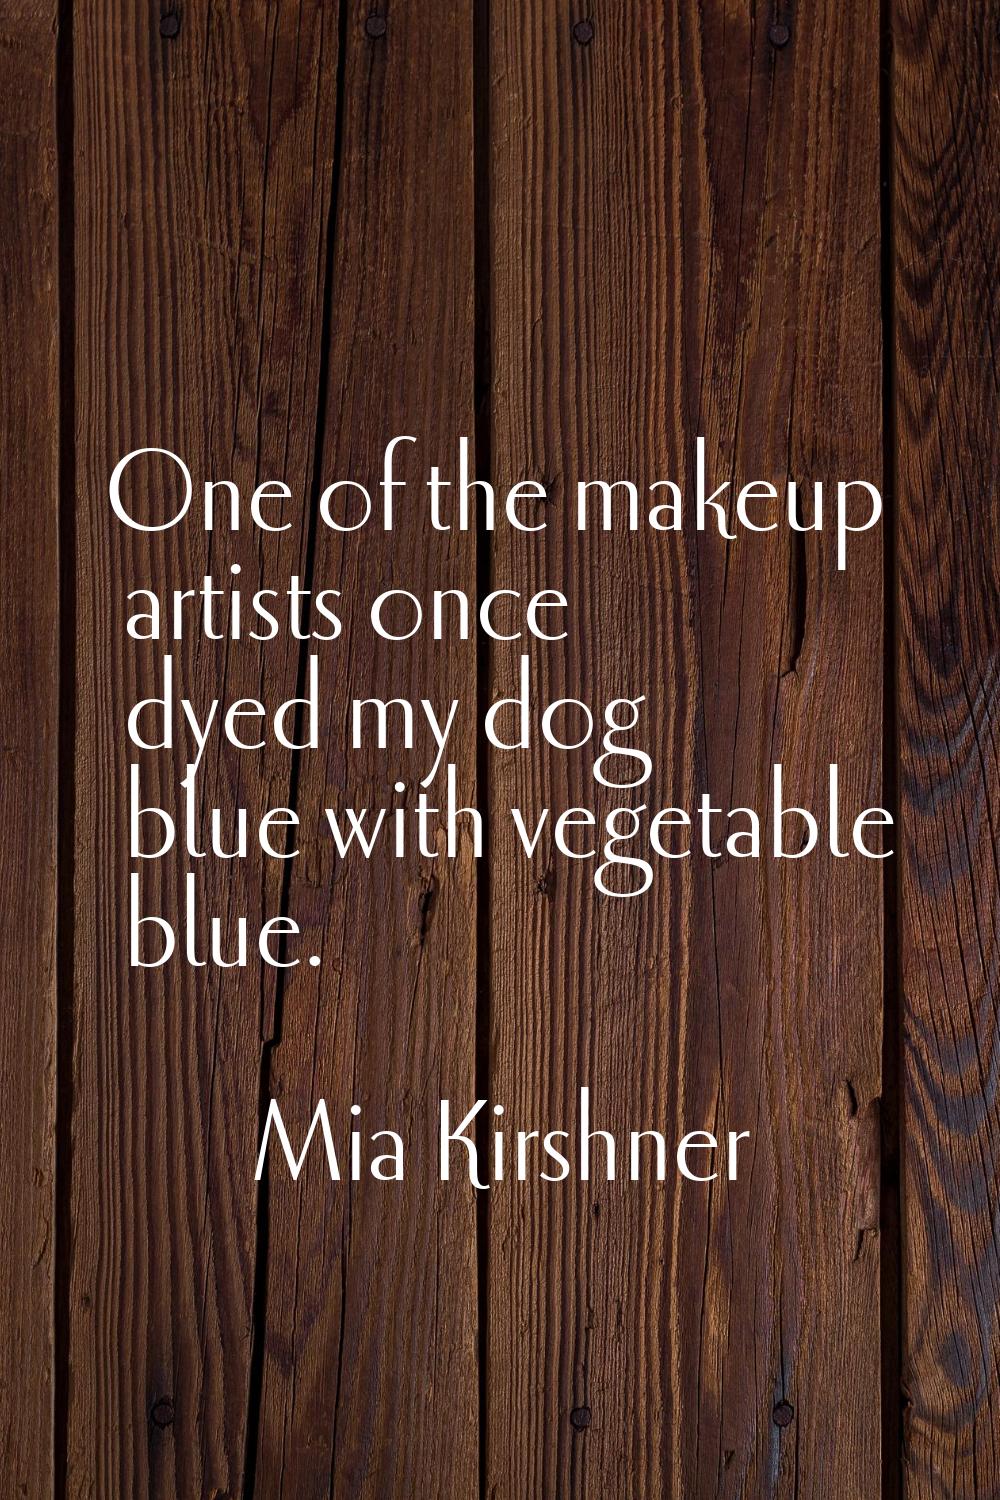 One of the makeup artists once dyed my dog blue with vegetable blue.